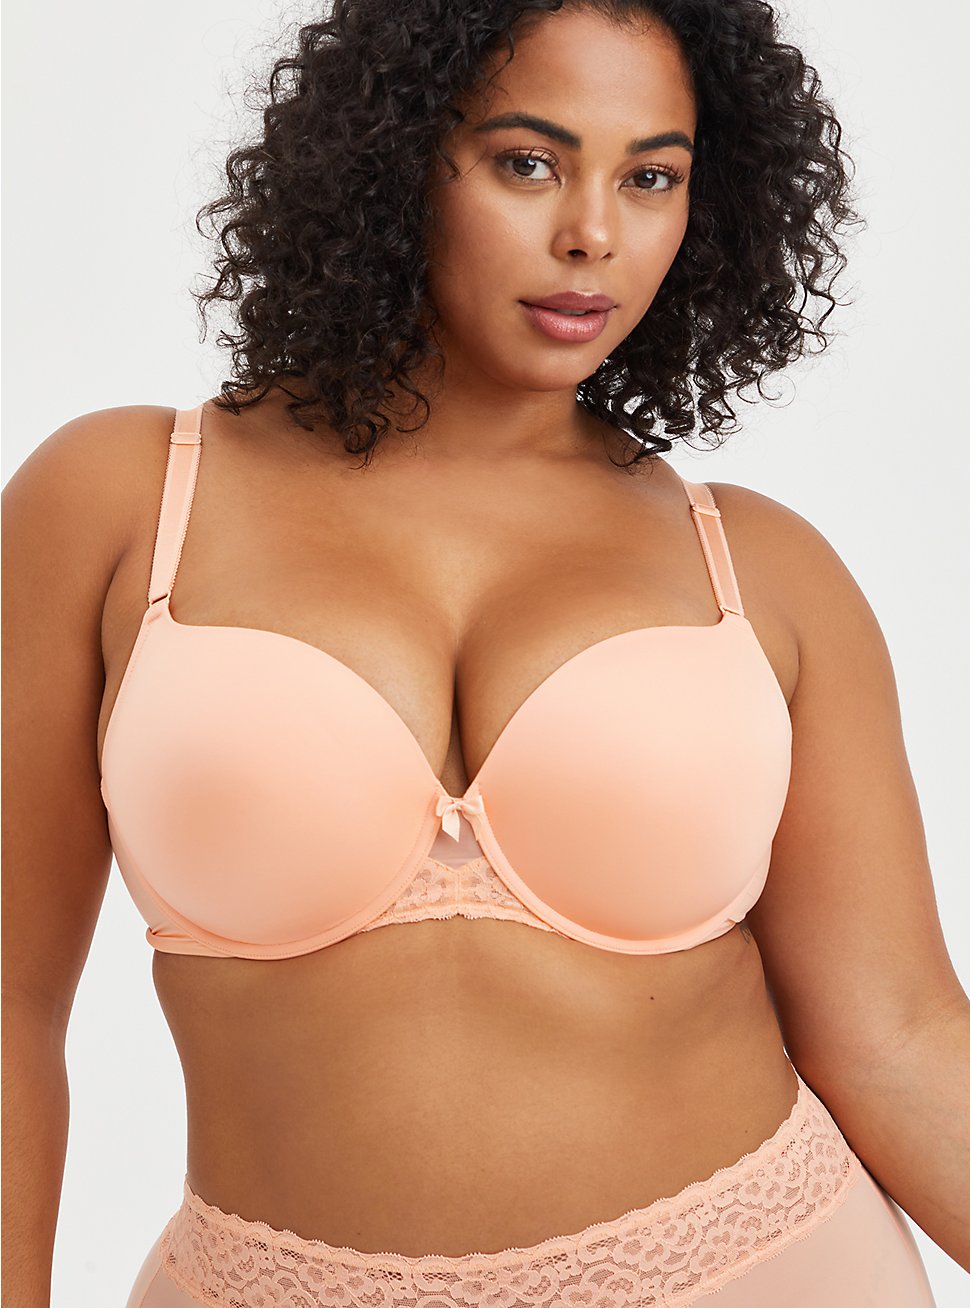 Push-Up T-Shirt Bra - Peach With 360° Back Smoothing ™, PEACH NECTAR, hi-res